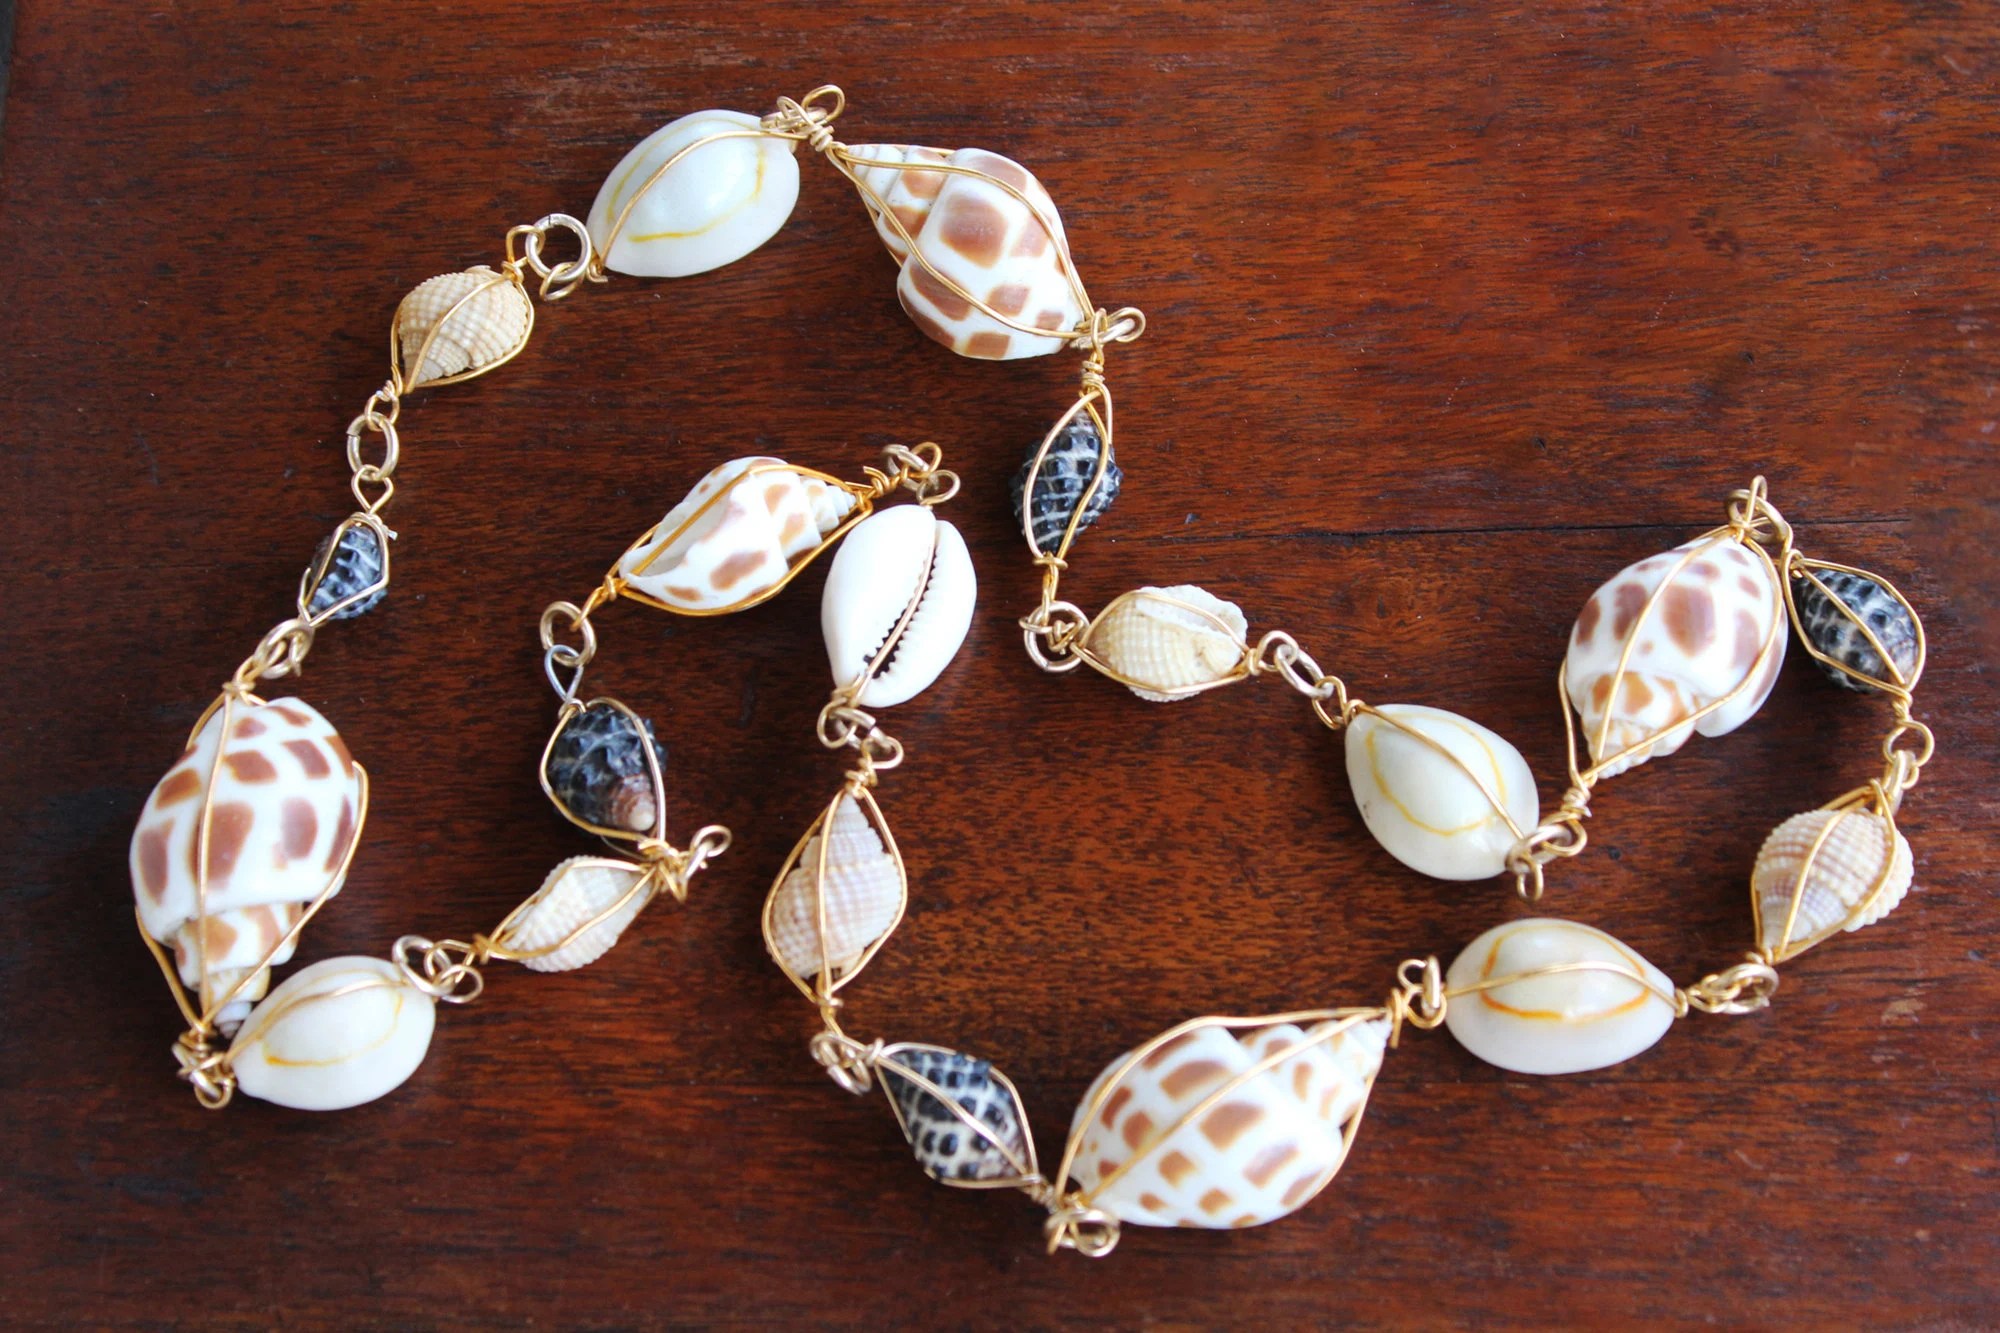 32" Natural Spiral Seashell Wire Wrapped Necklace - Babylon, Cowrie, Nassa - Vintage, Statement, Bold, Chunky, Beach, Boho, Retro